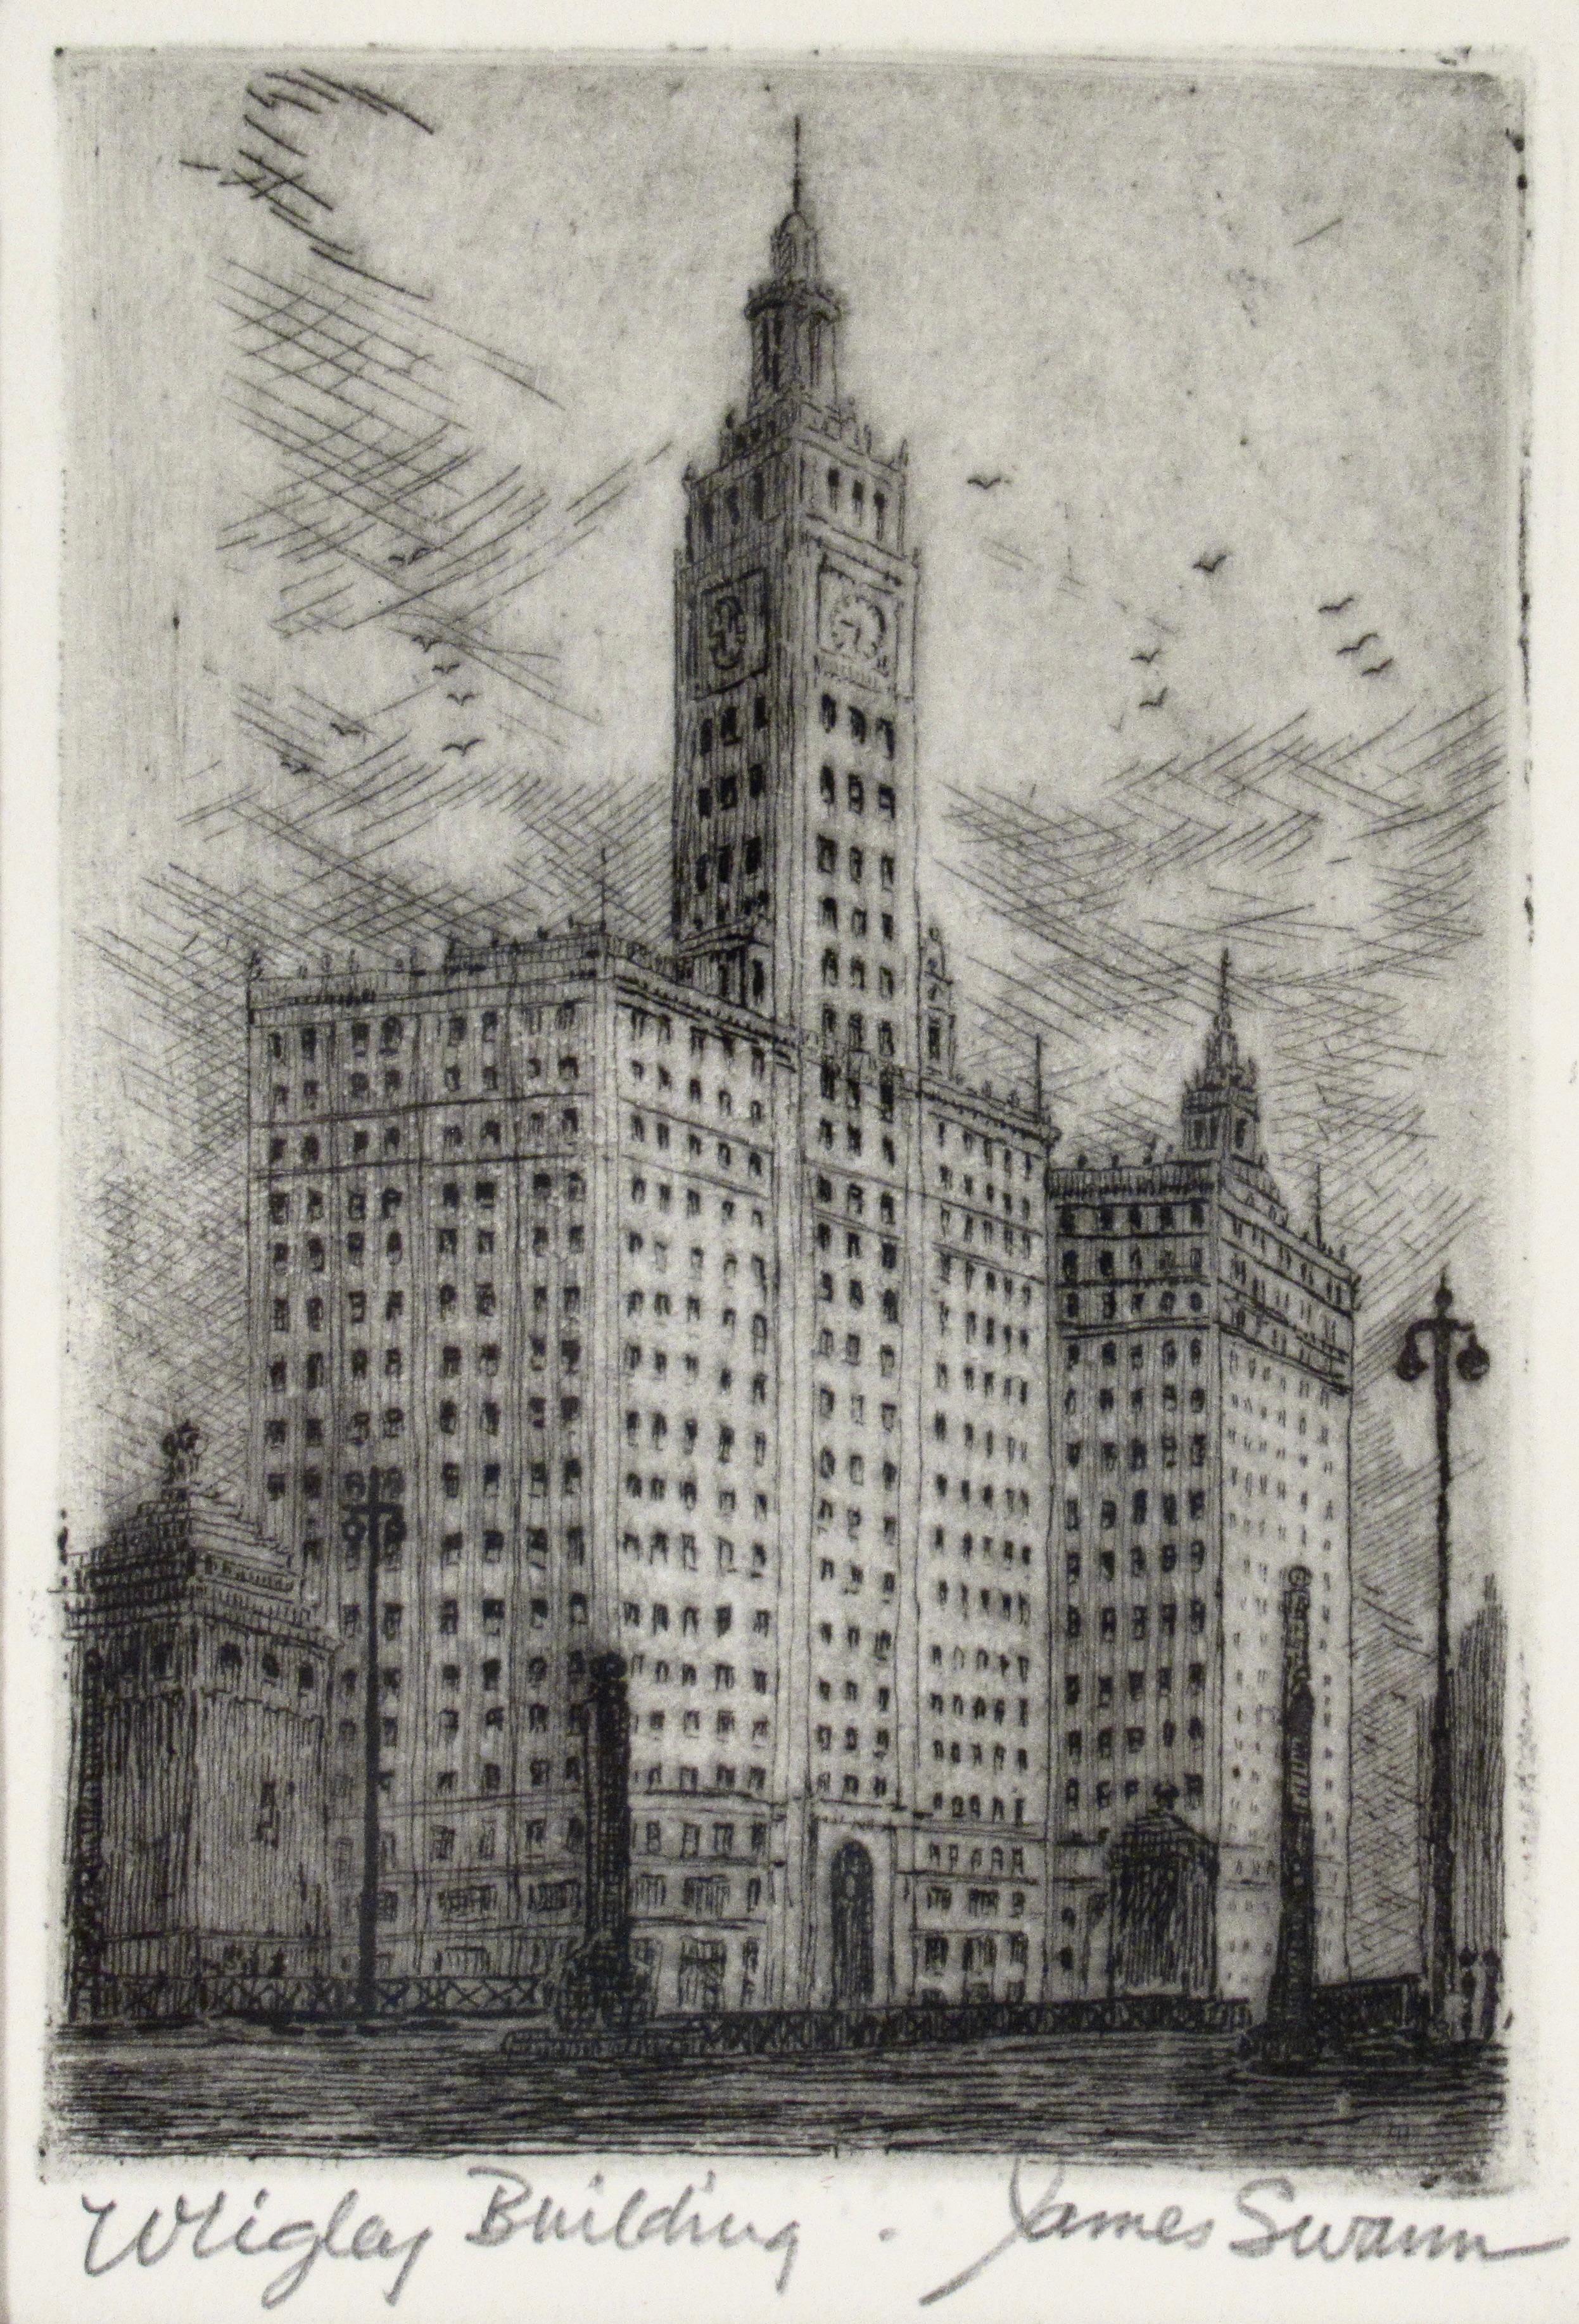 Wrigley Building (Chicago) - Print by James Swann